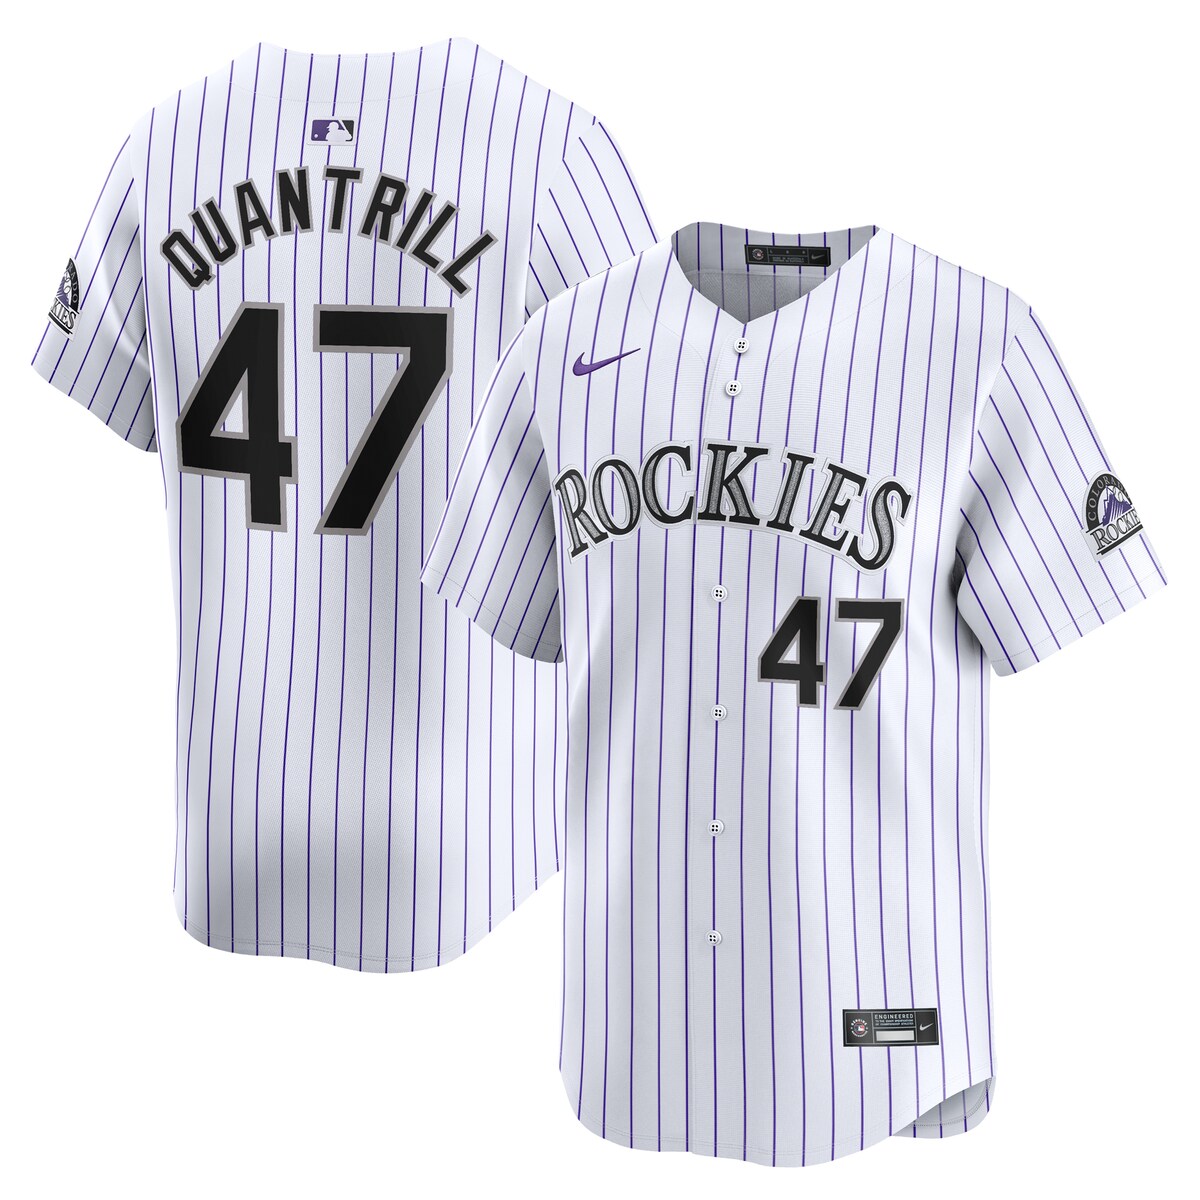 MLB bL[Y ~ebh jtH[ Nike iCL Y zCg (Nike Men's Limited Jerseys - FTF All Player MASTER Style)